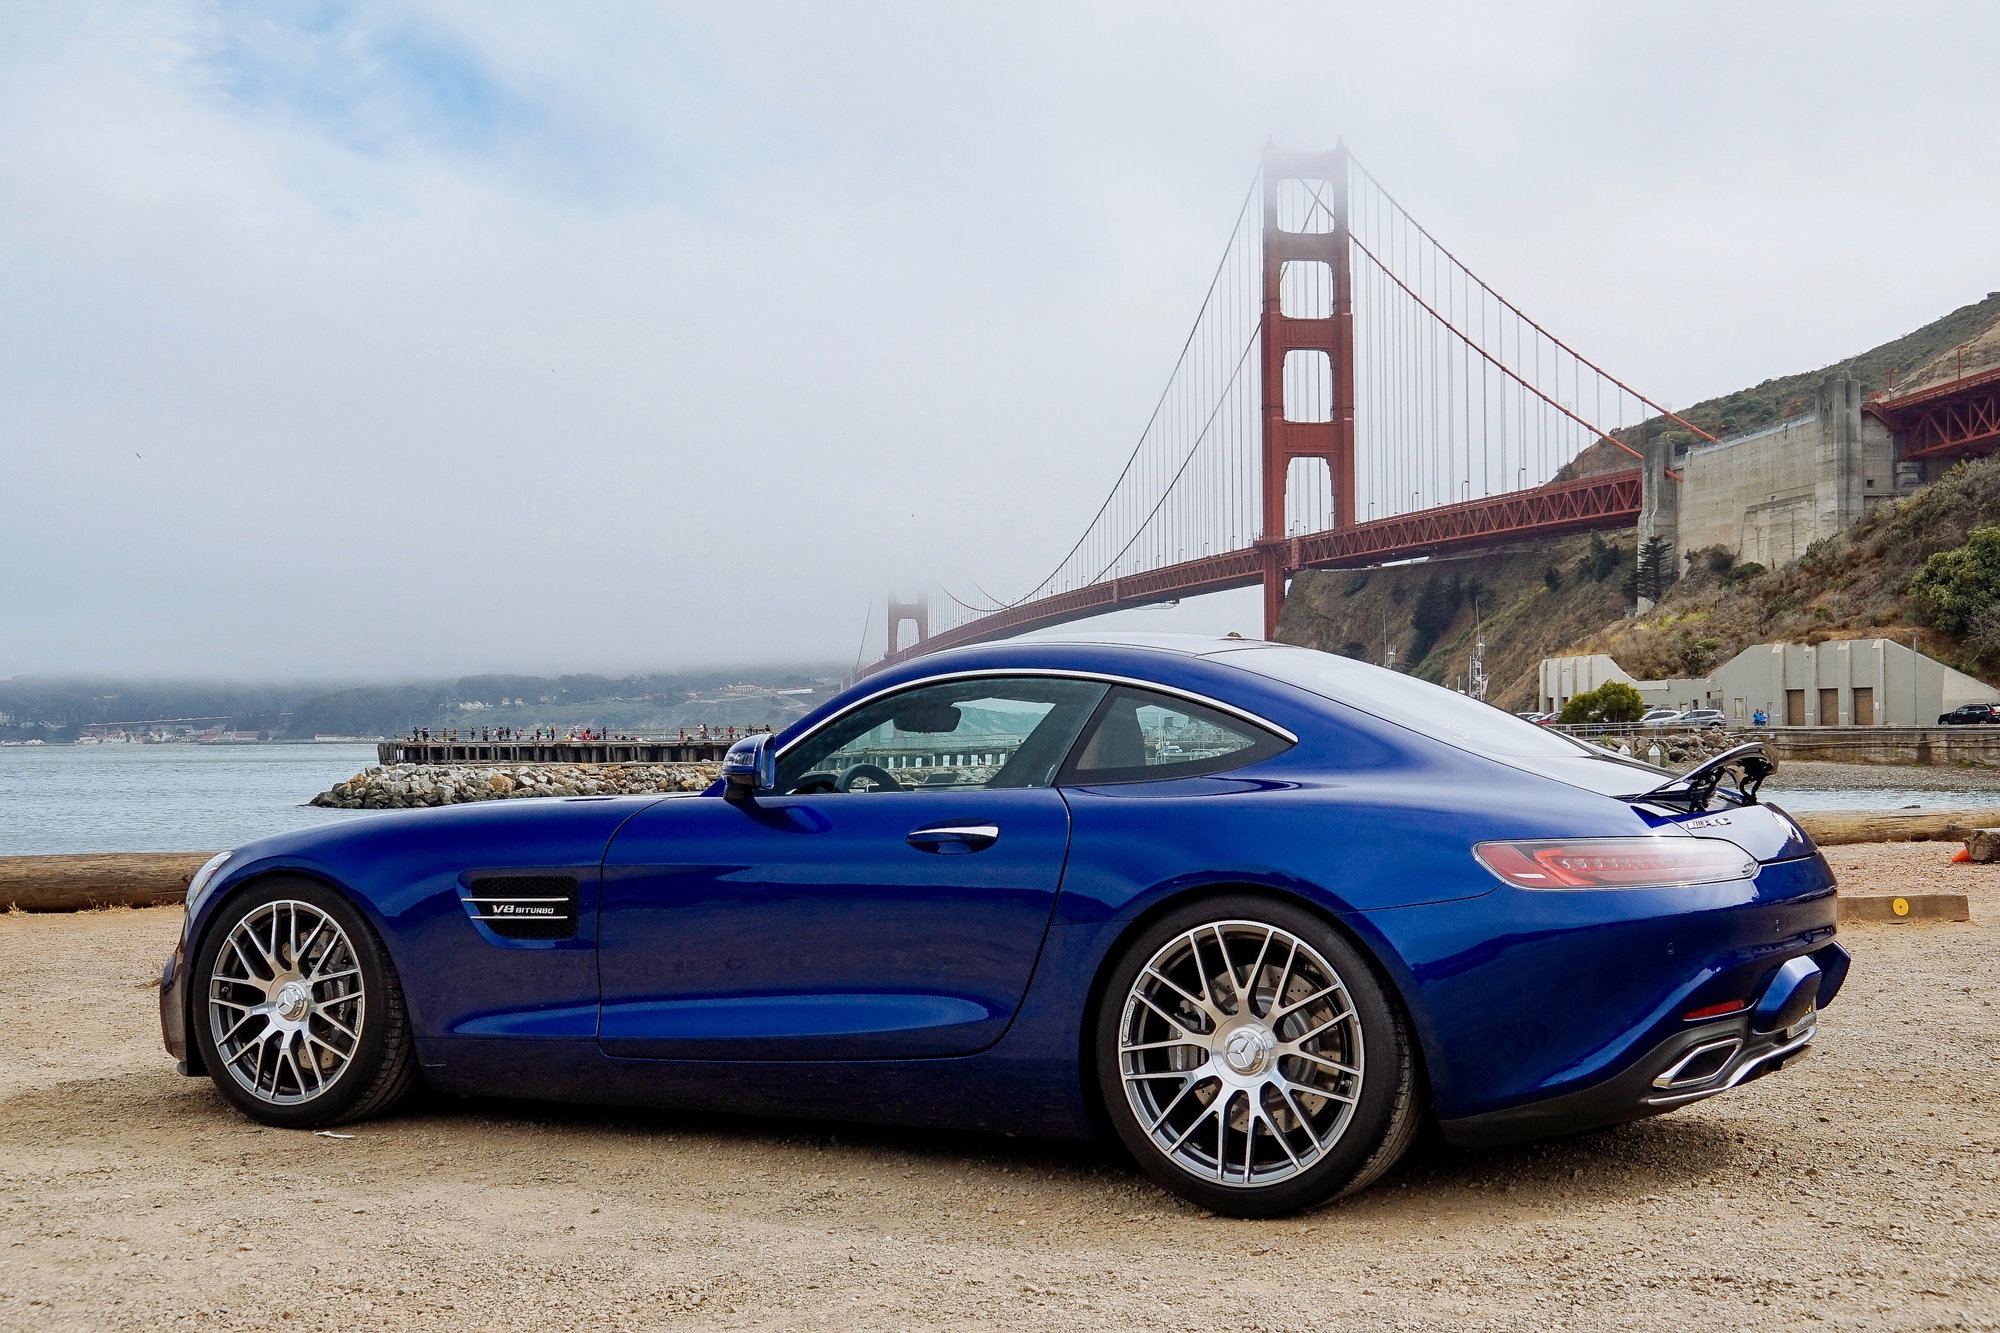 2017 Mercedes-Benz AMG GT - 2017 Brilliant Blue AMG GT w/ 5.8k miles - Used - VIN WDDYJ7HAXHA011024 - 5,800 Miles - 8 cyl - 2WD - Automatic - Coupe - Blue - San Mateo, CA 94402, United States